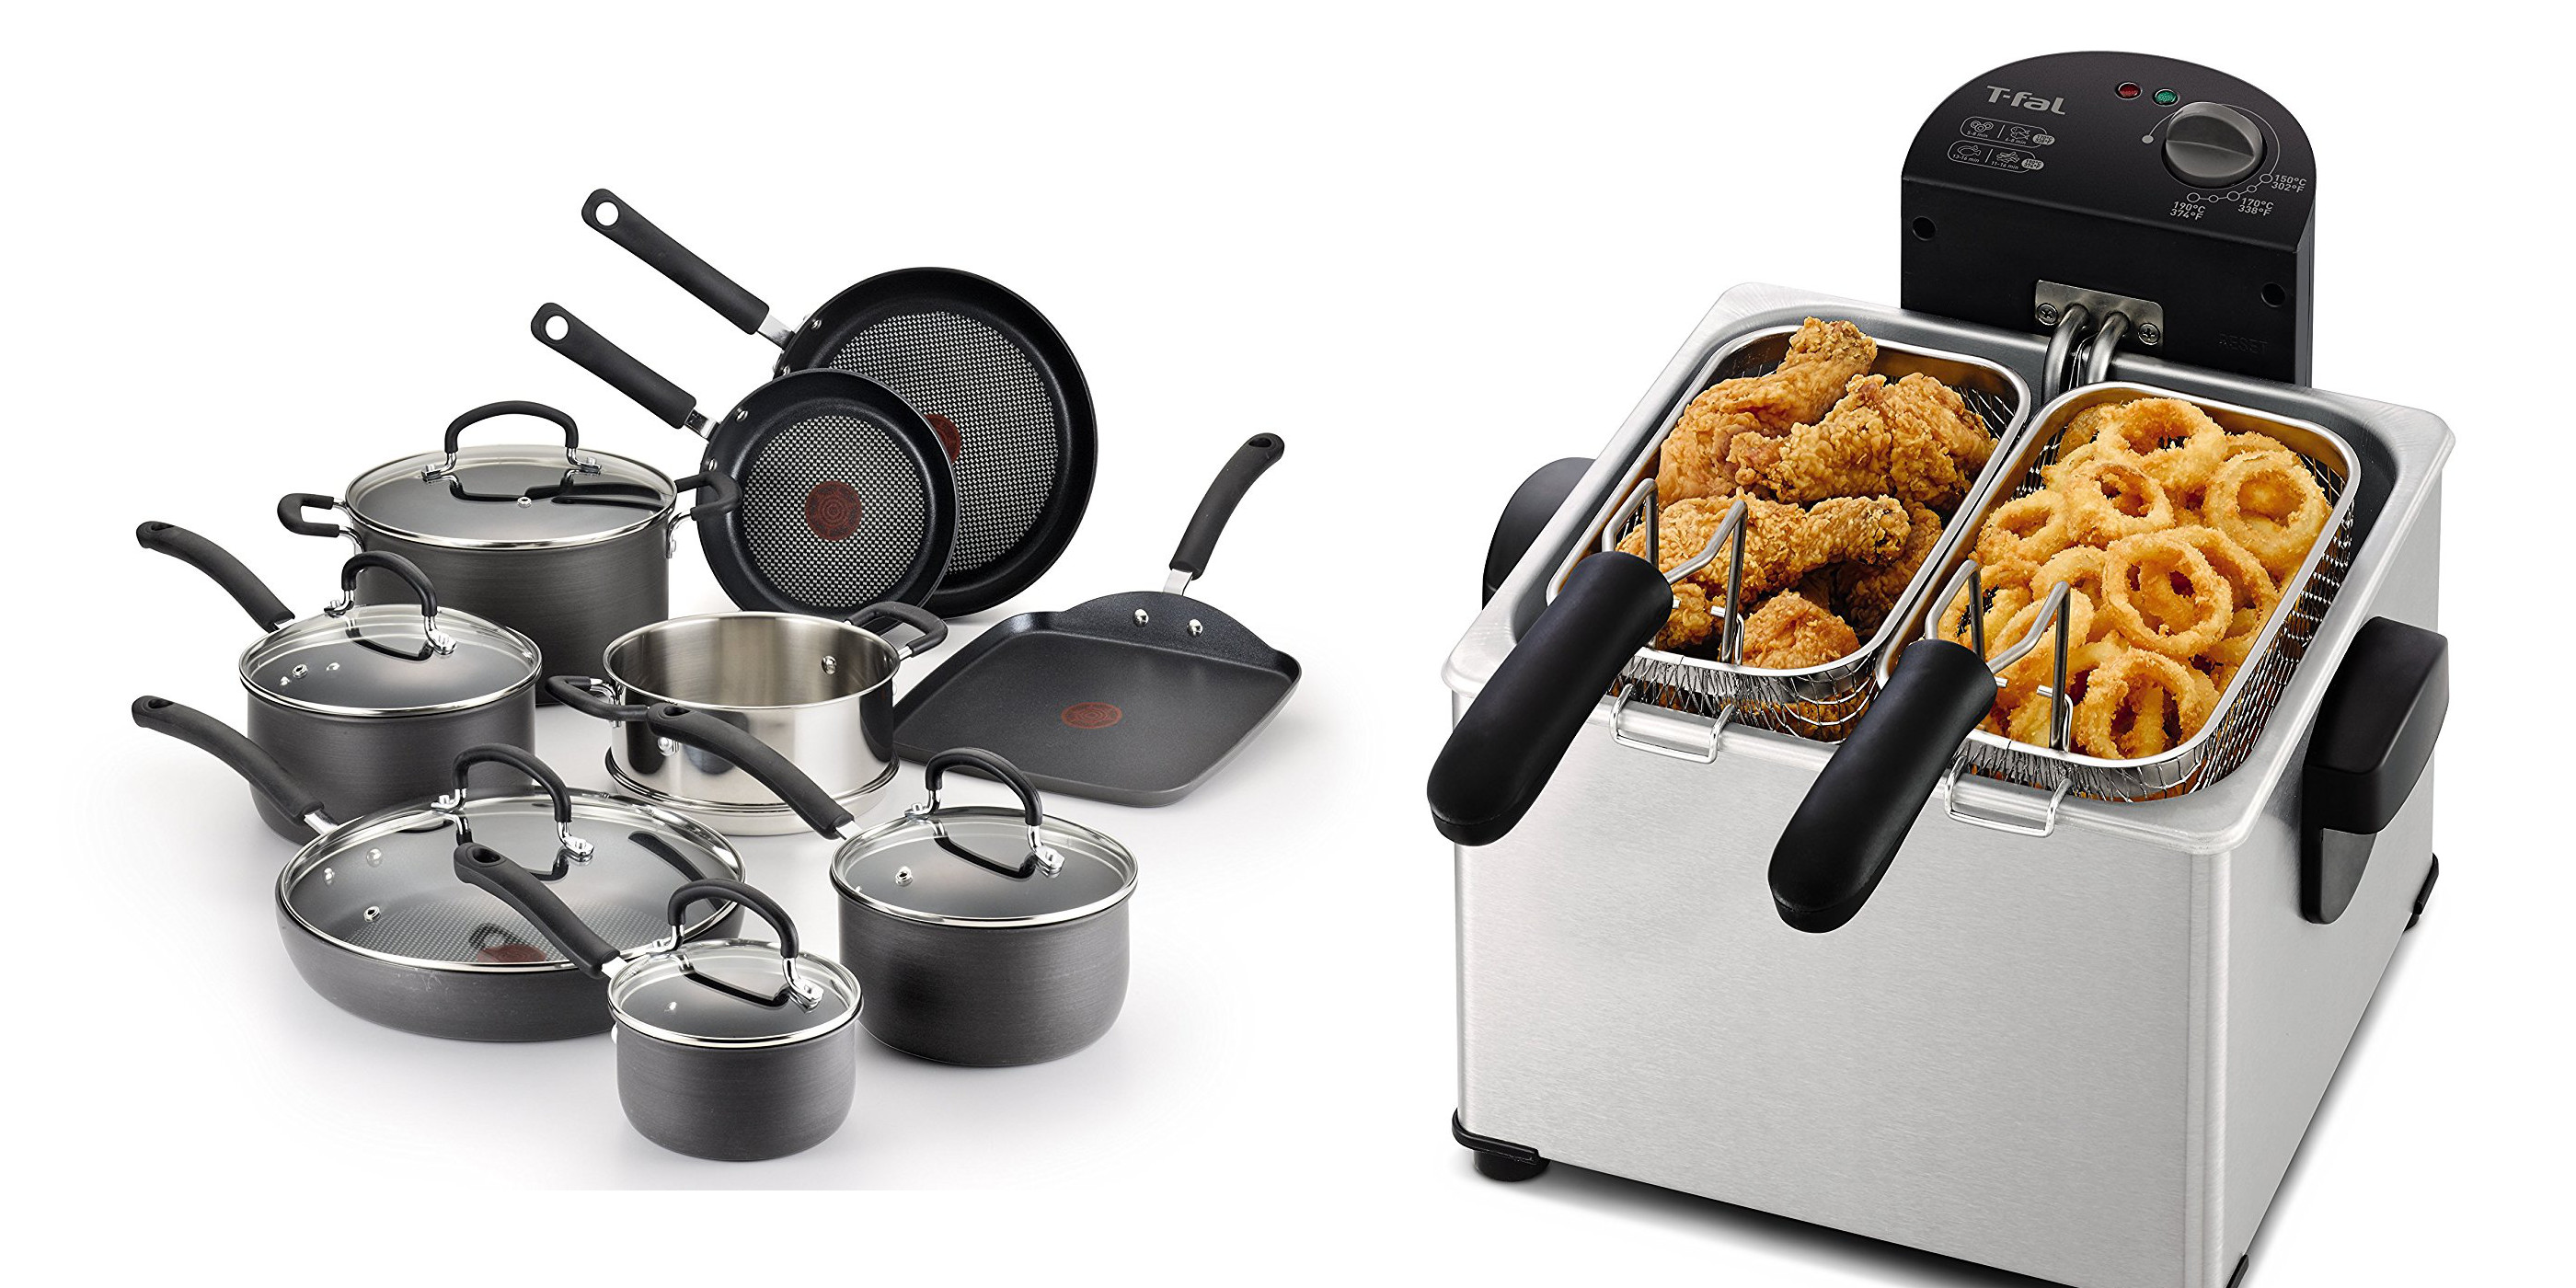 T-fal cookware gets big Cyber Monday price drops at Amazon, starting from $17 - 9to5Toys